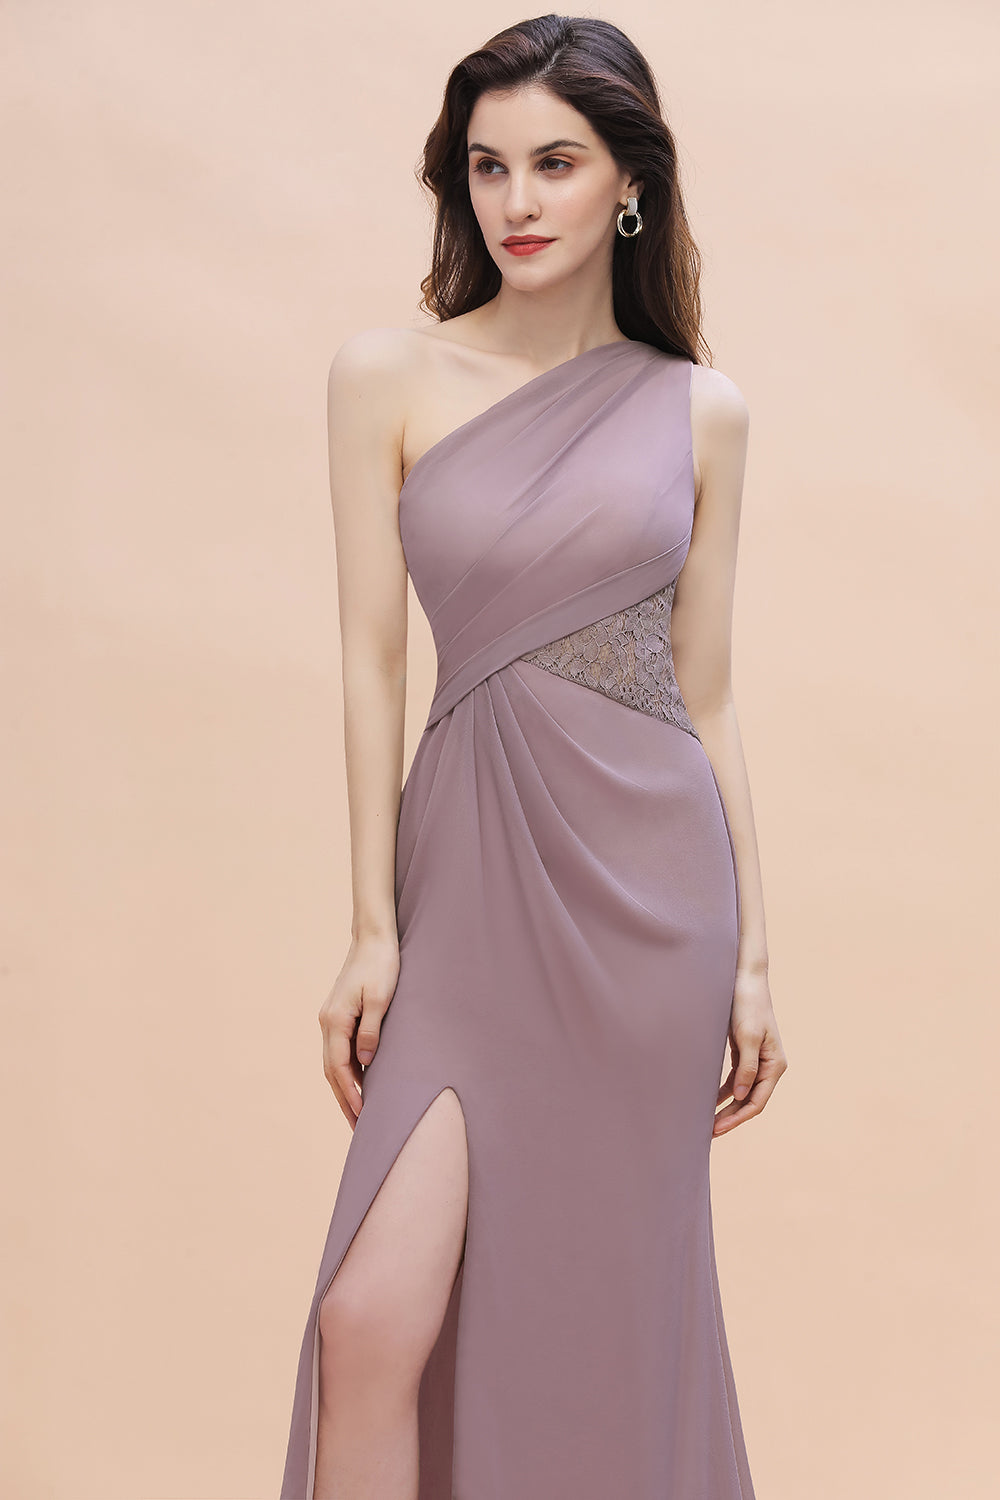 Chic One-Shoulder Dusk Chiffon Lace Ruffle Bridesmaid Dress with Front Slit On Sale-27dress